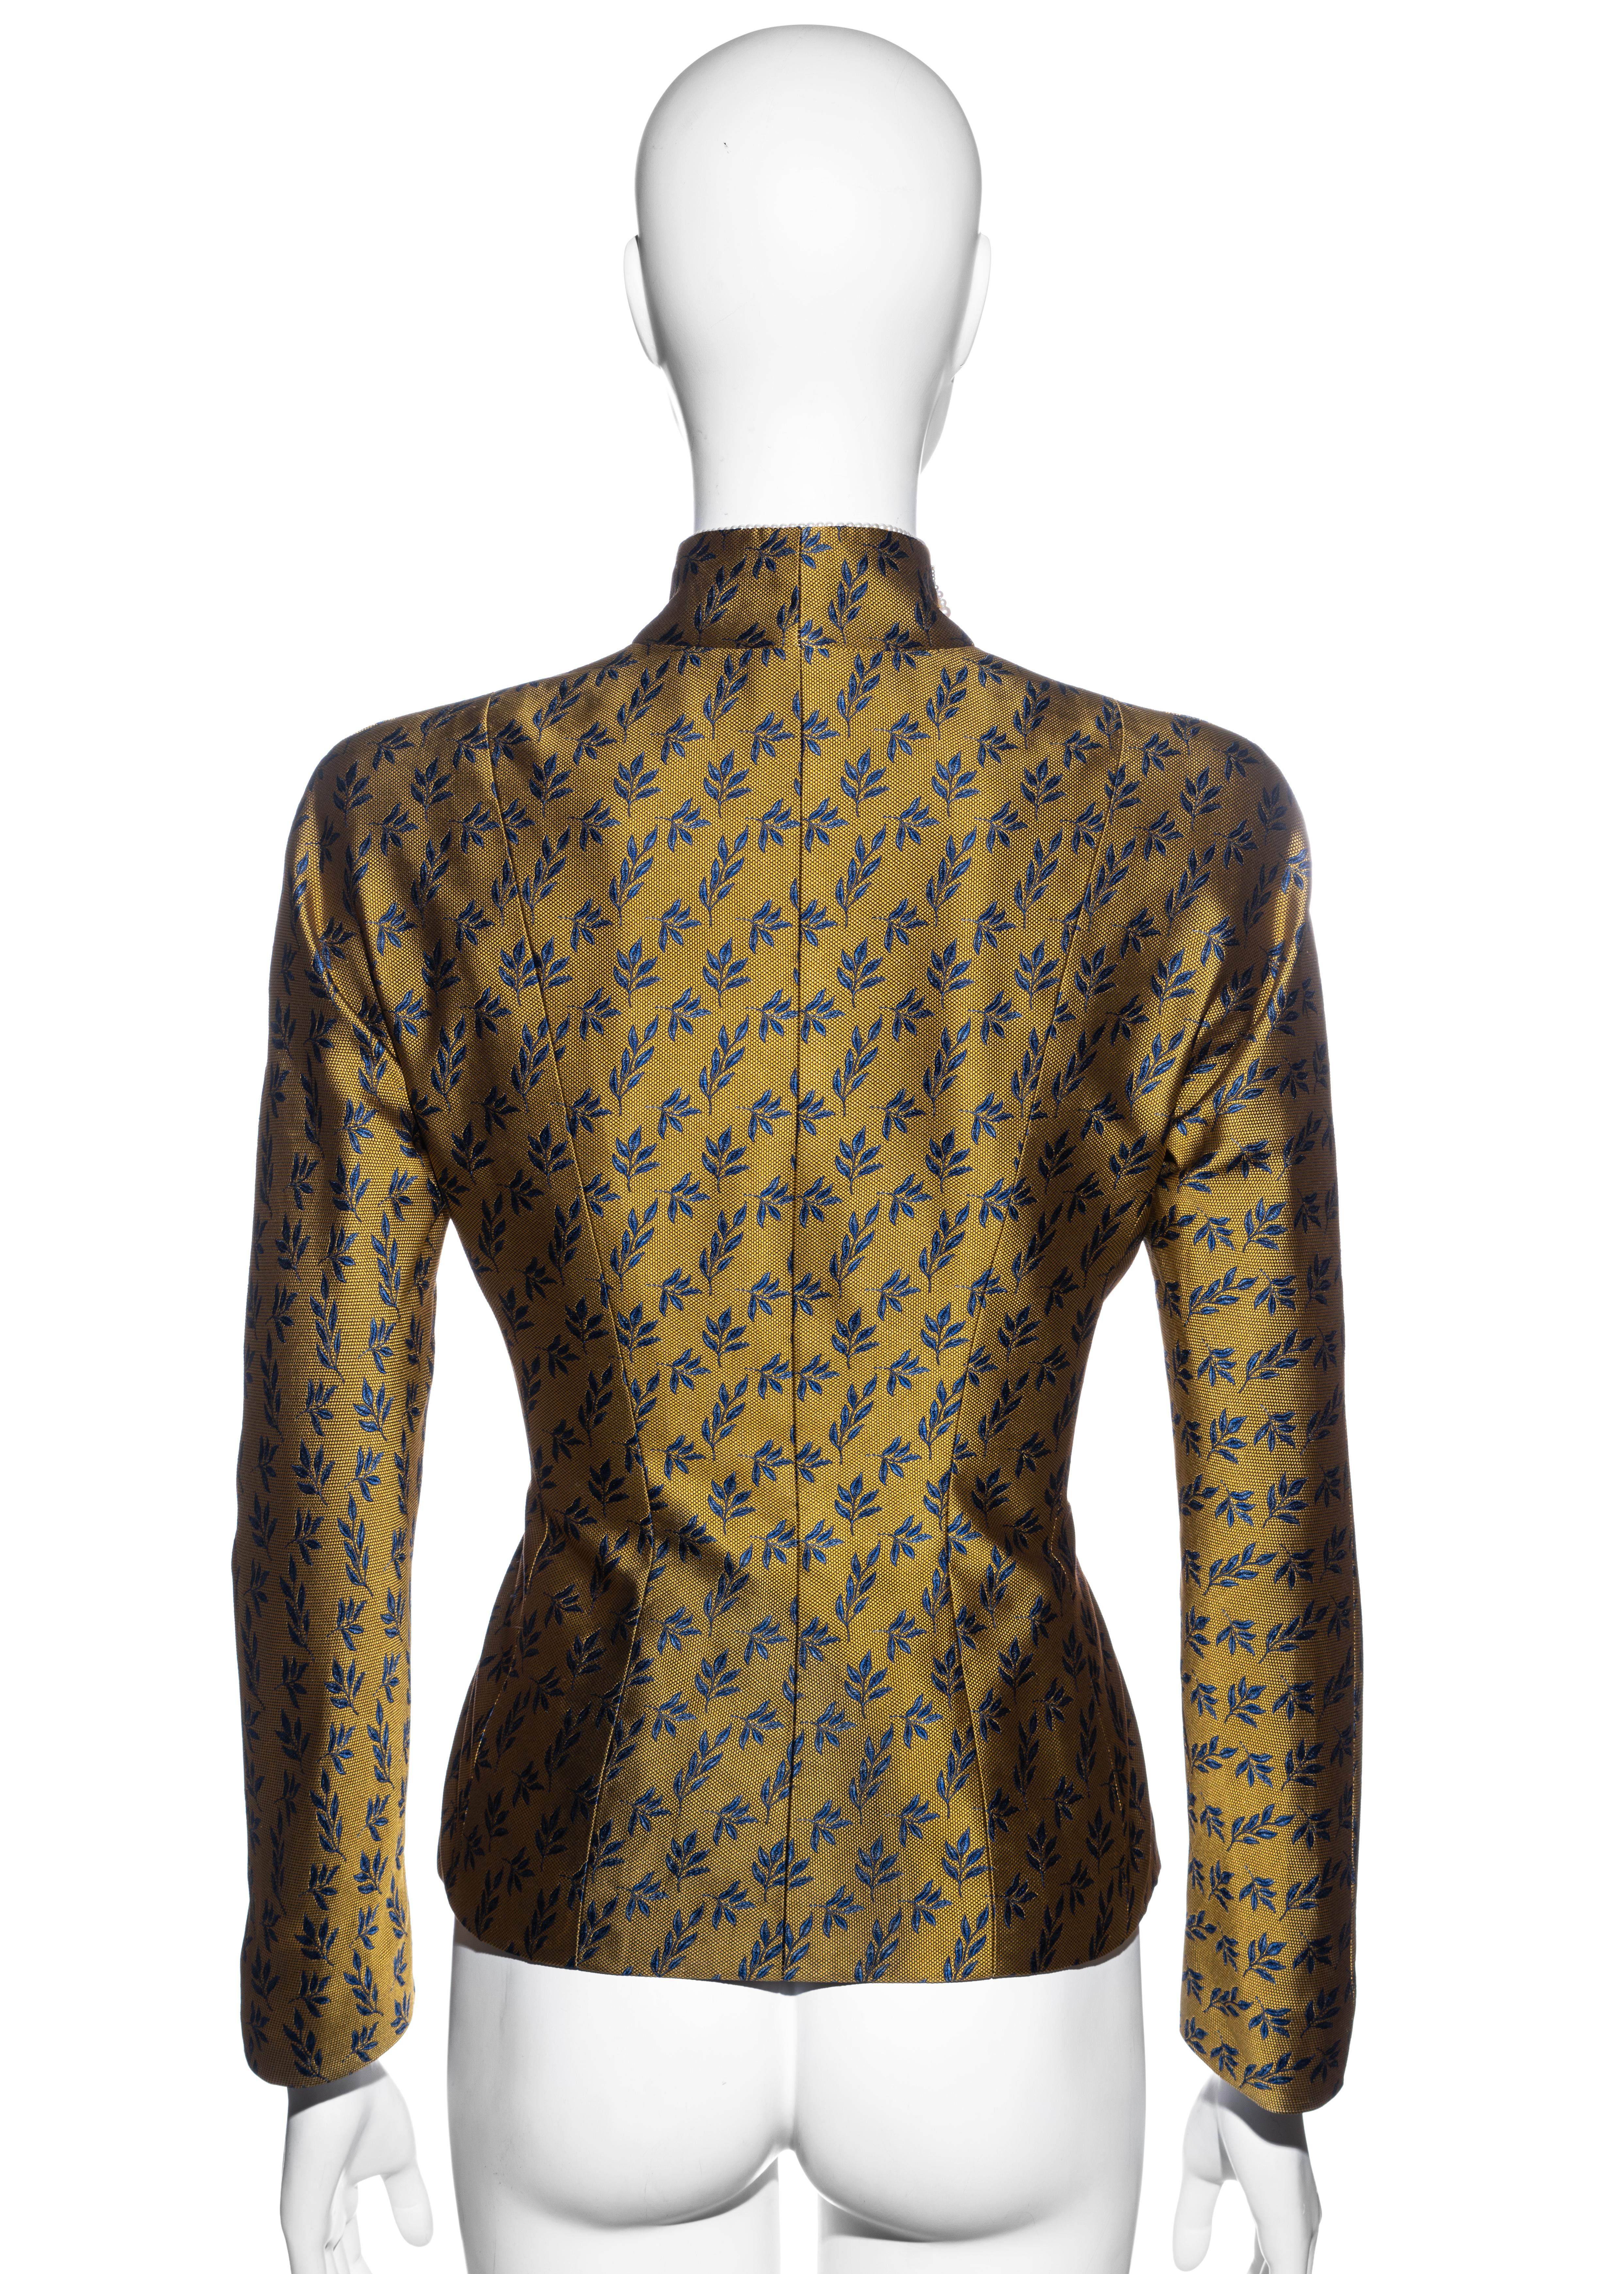 Christian Dior by John Galliano gold satin jacquard fitted jacket, fw 1997 4